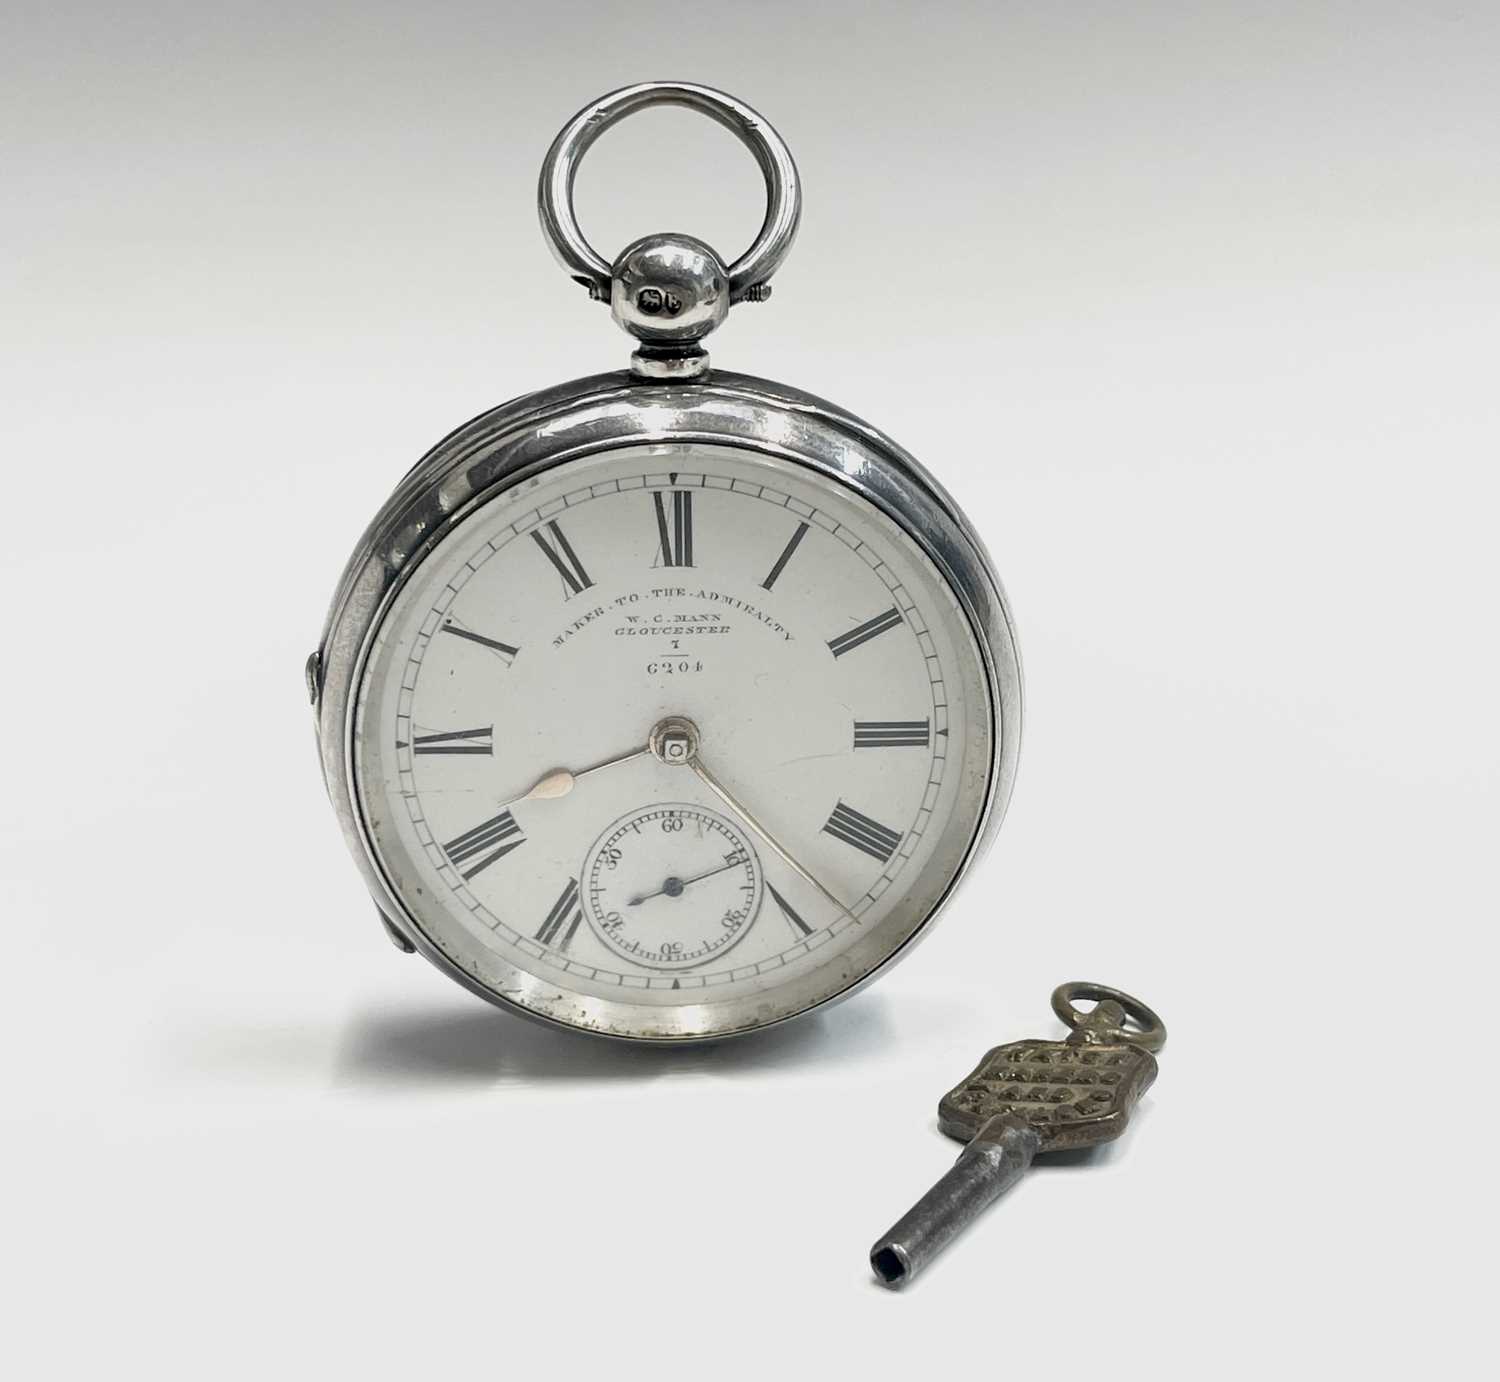 A silver cased open-face pocket watch by W C Mann Gloucester "Maker to The Admiralty" with key - Image 3 of 9